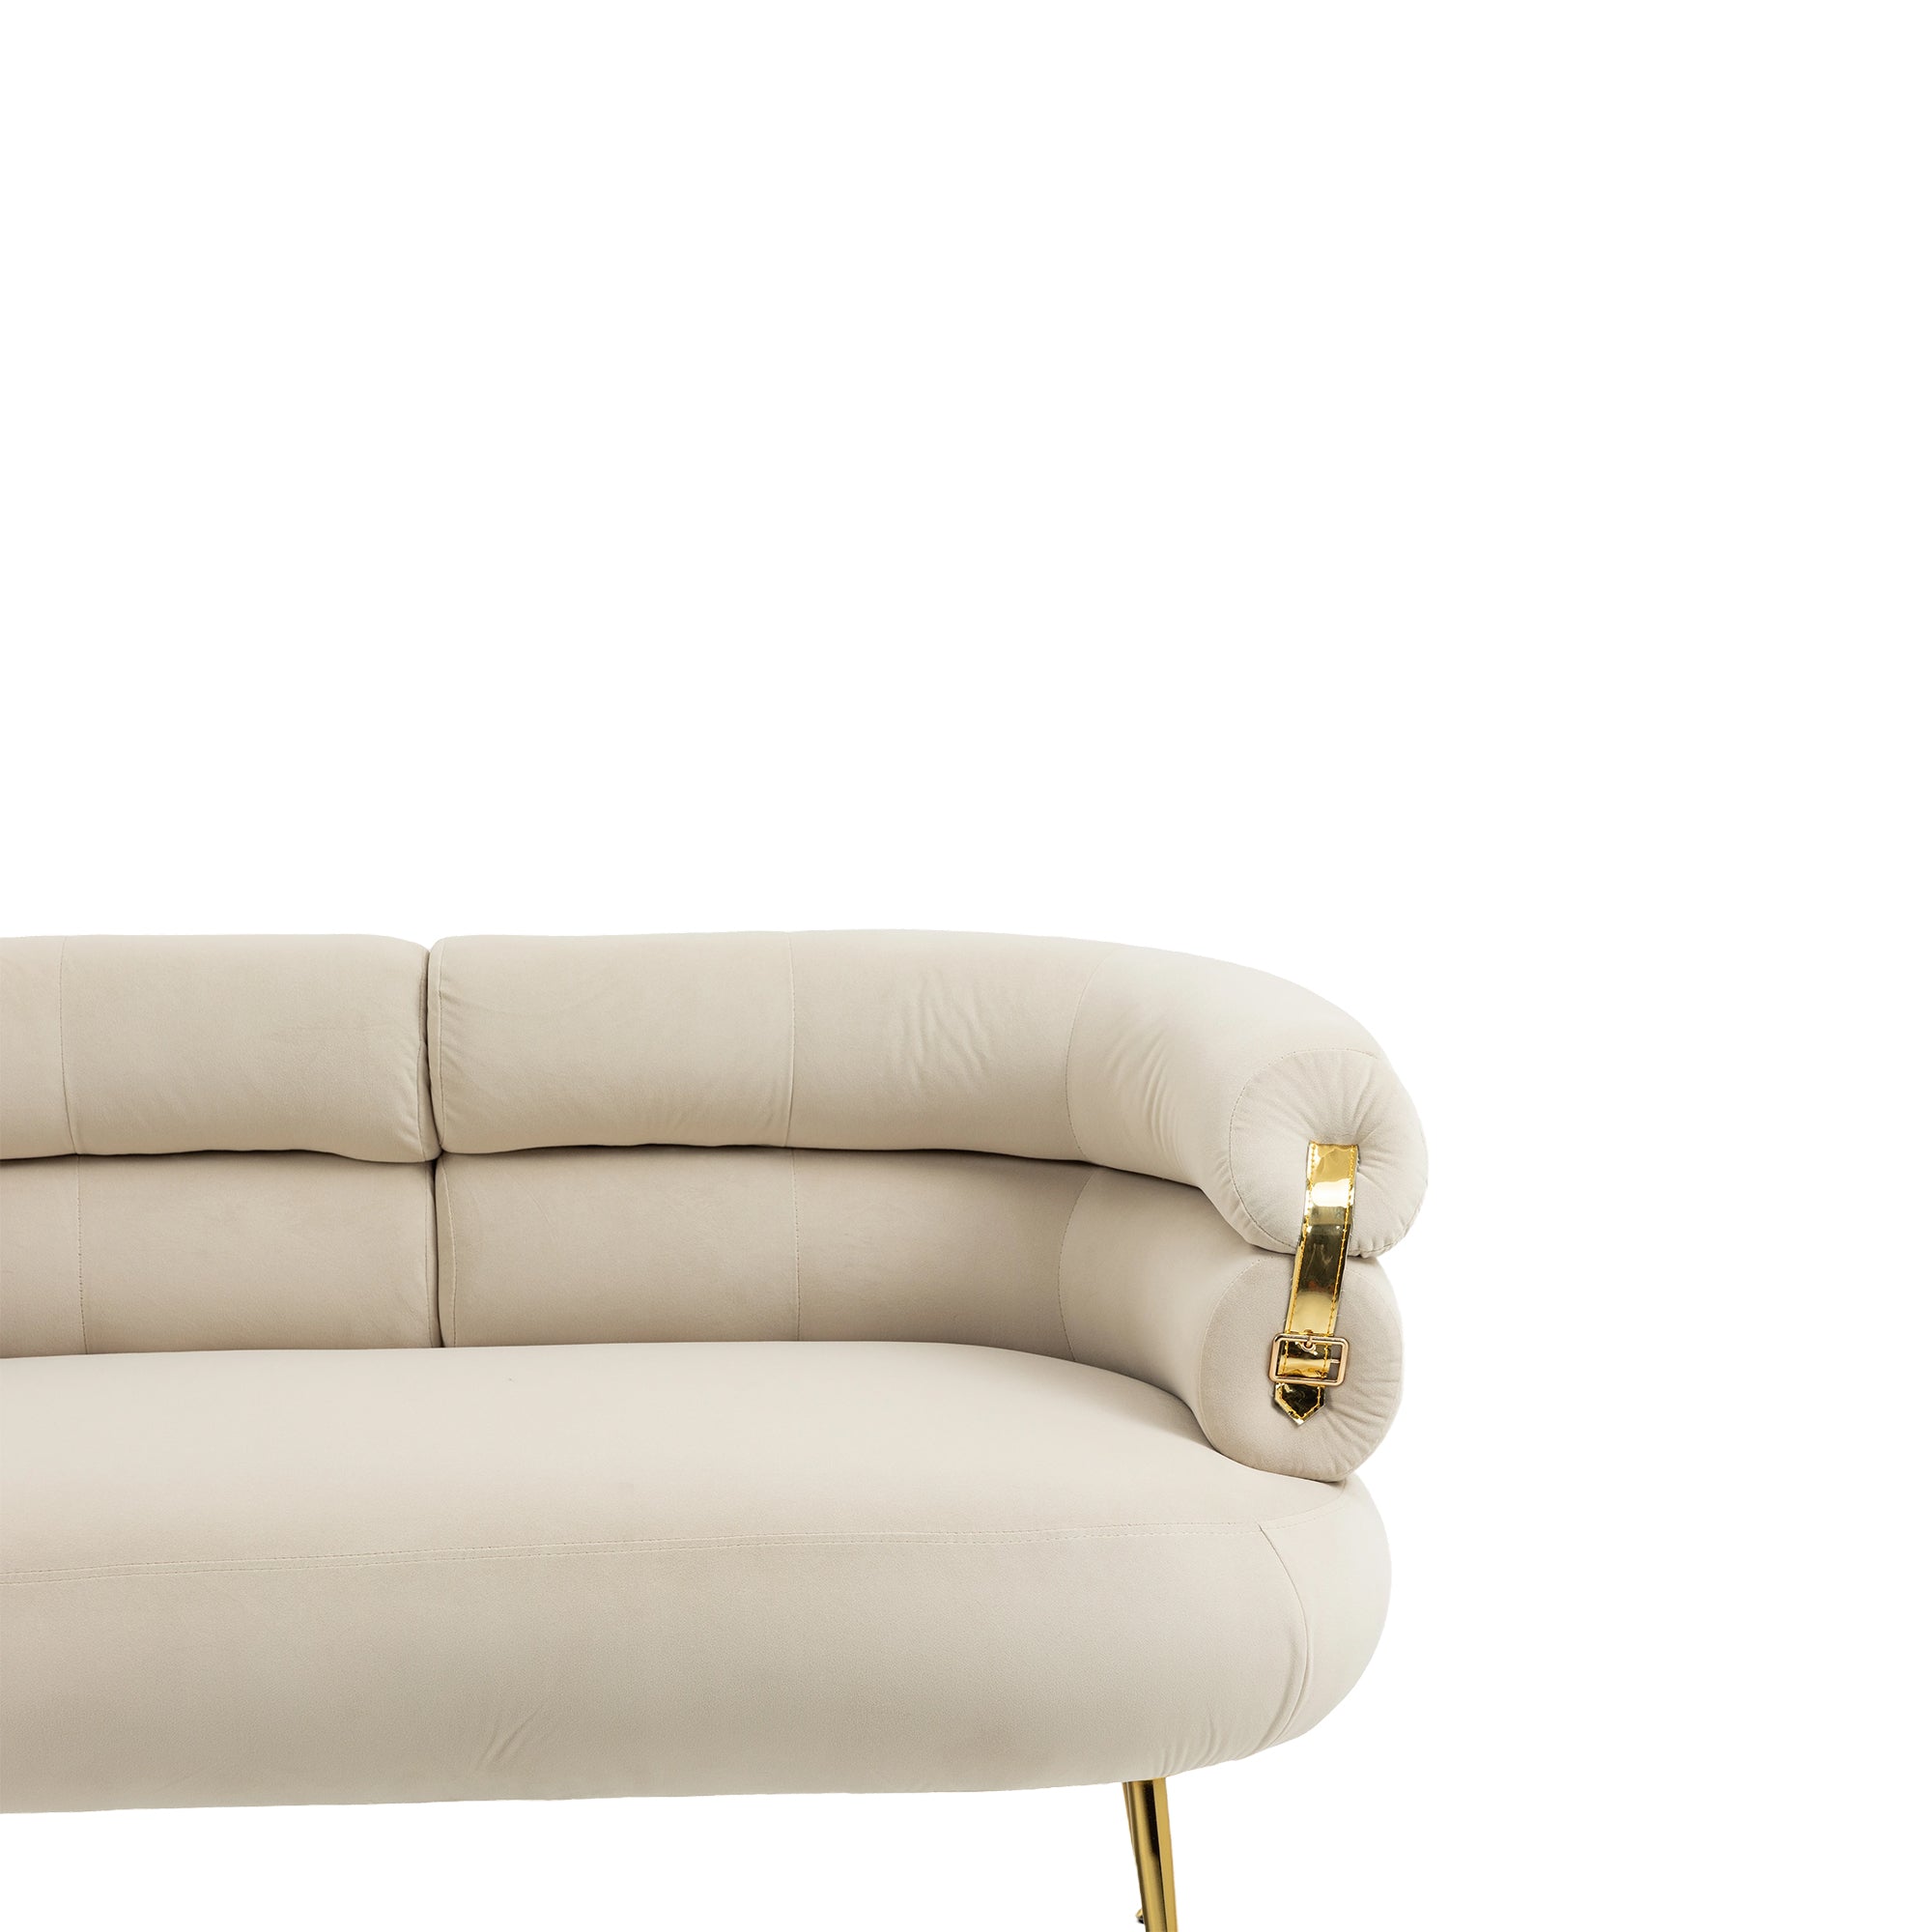 COOLMORE Accent Chair ,leisure chair with Golden feet beige-velvet